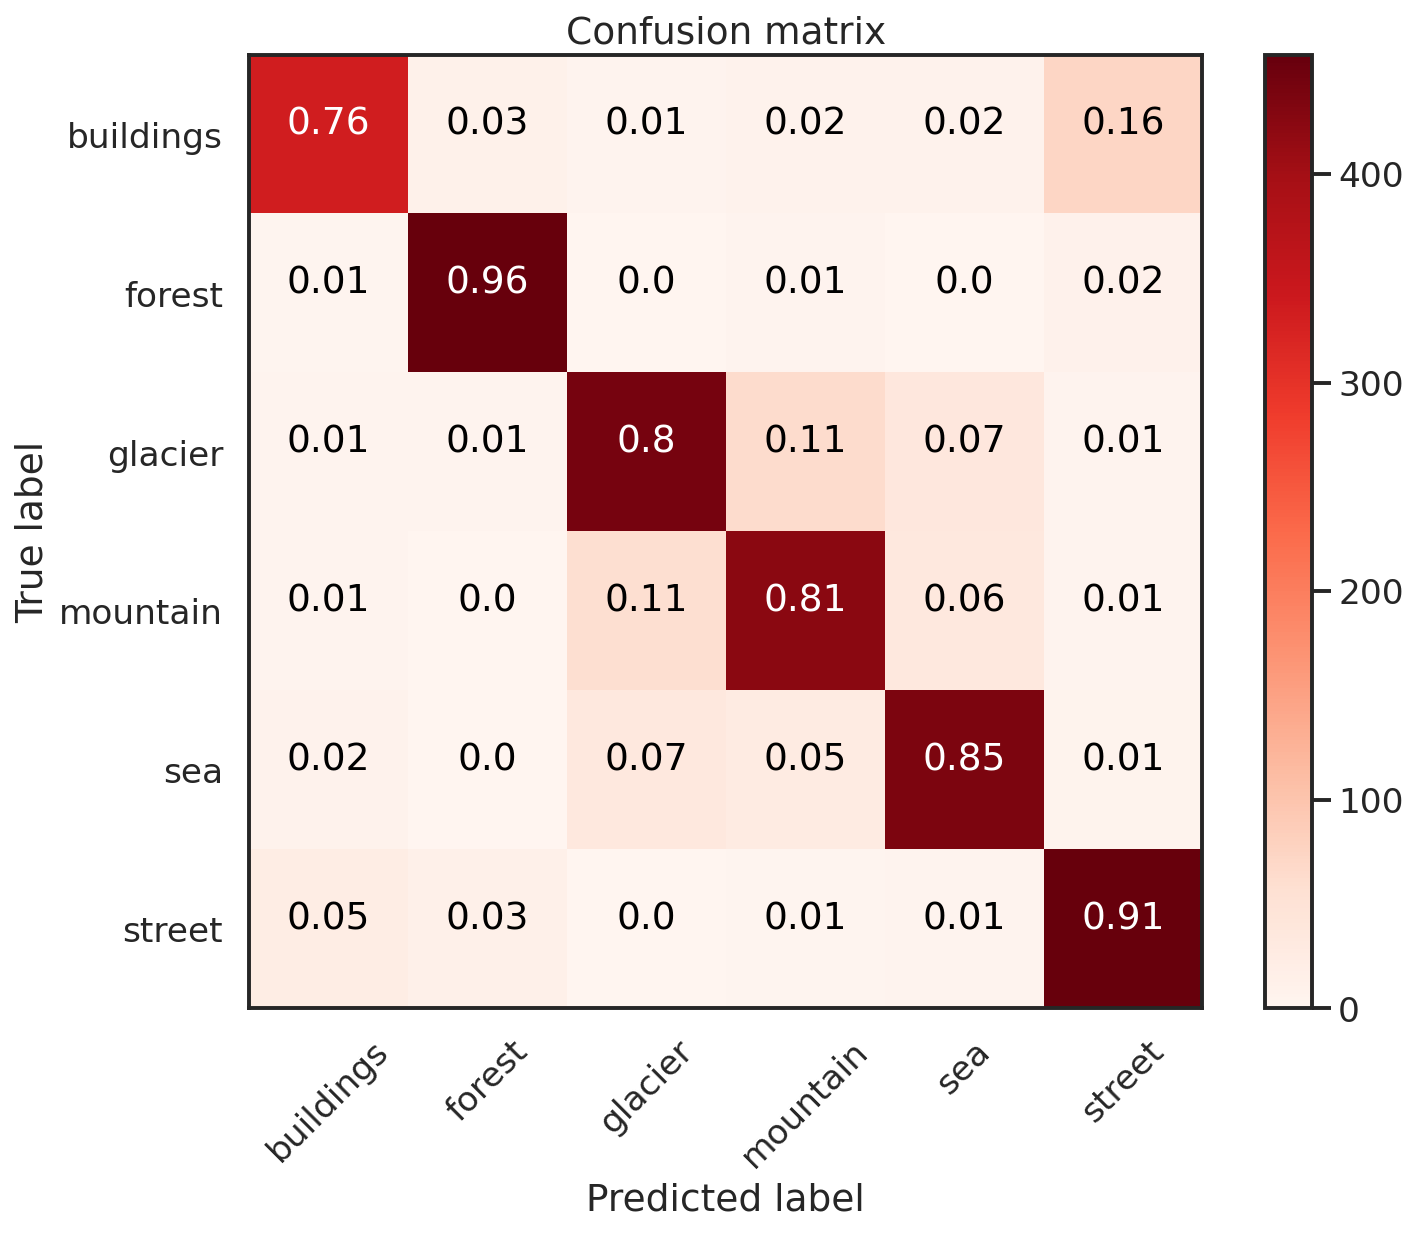 Confusion matrix plot using test set predicted labels and actual labels for all 6 classes.